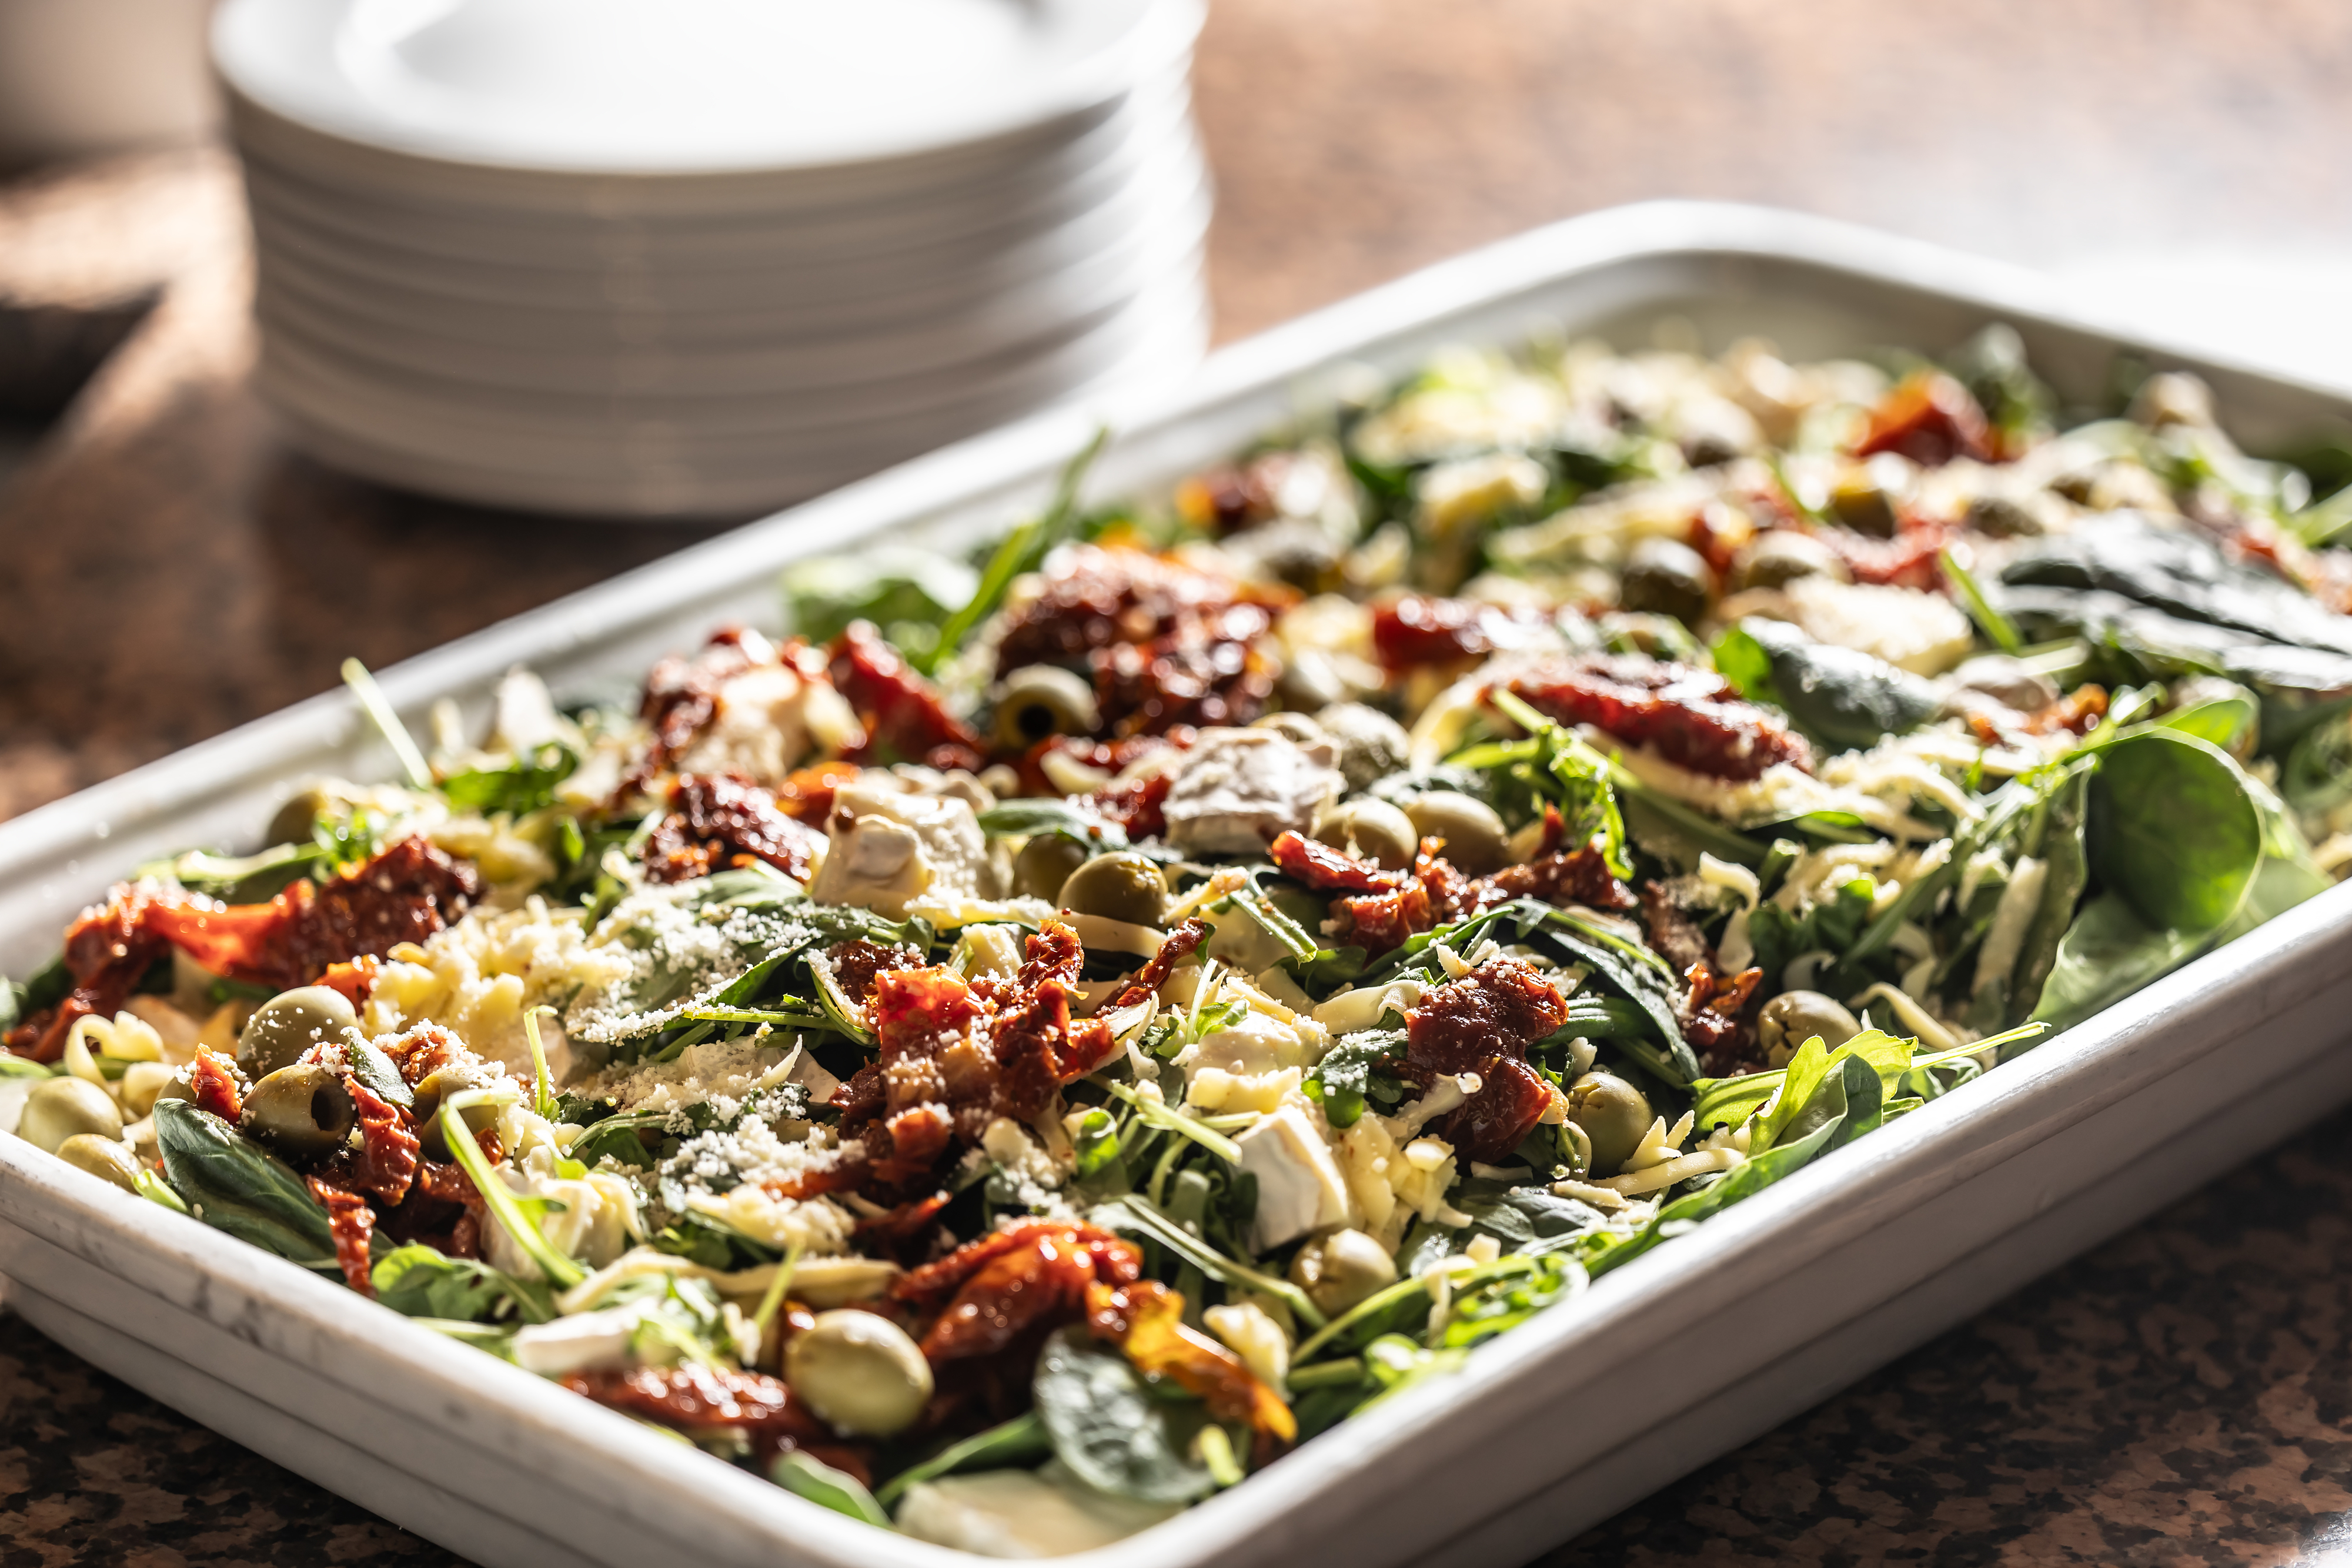 Tray with spinach salad, sundried tomatoes, seeds, grated cheese